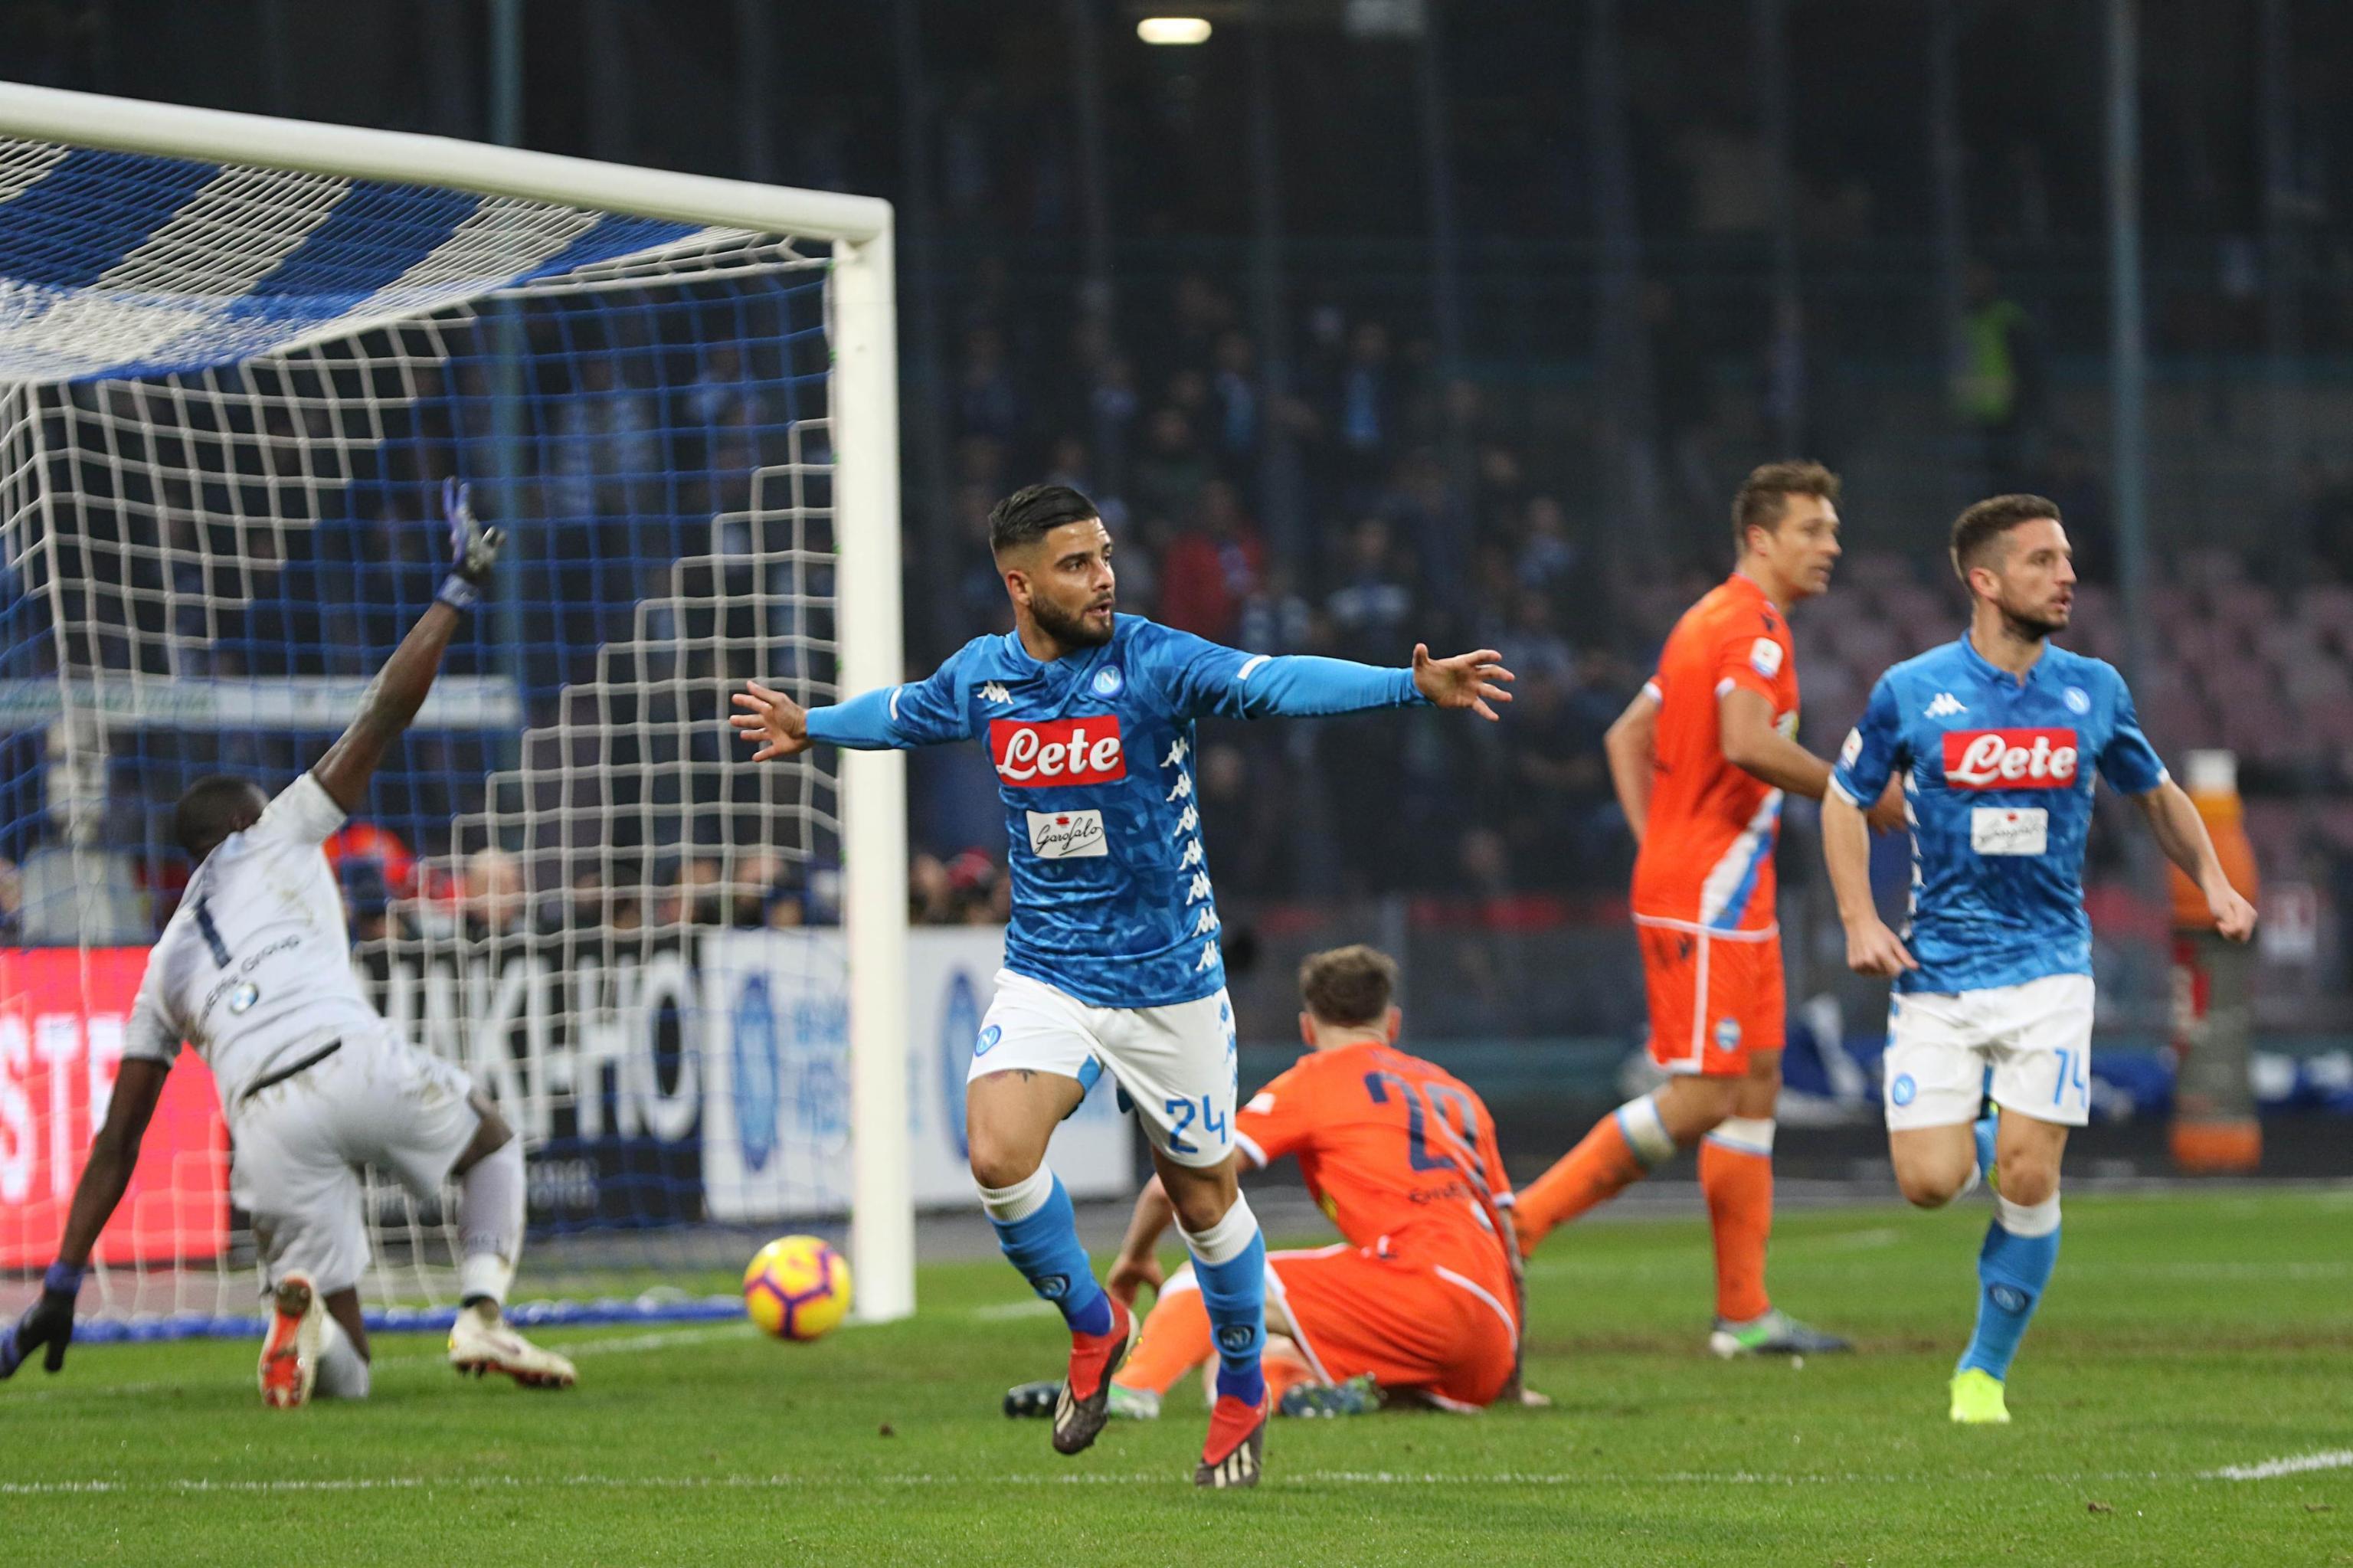 Napoli beats Spal 1-0 in Serie A ahead of Juventus vs. Roma